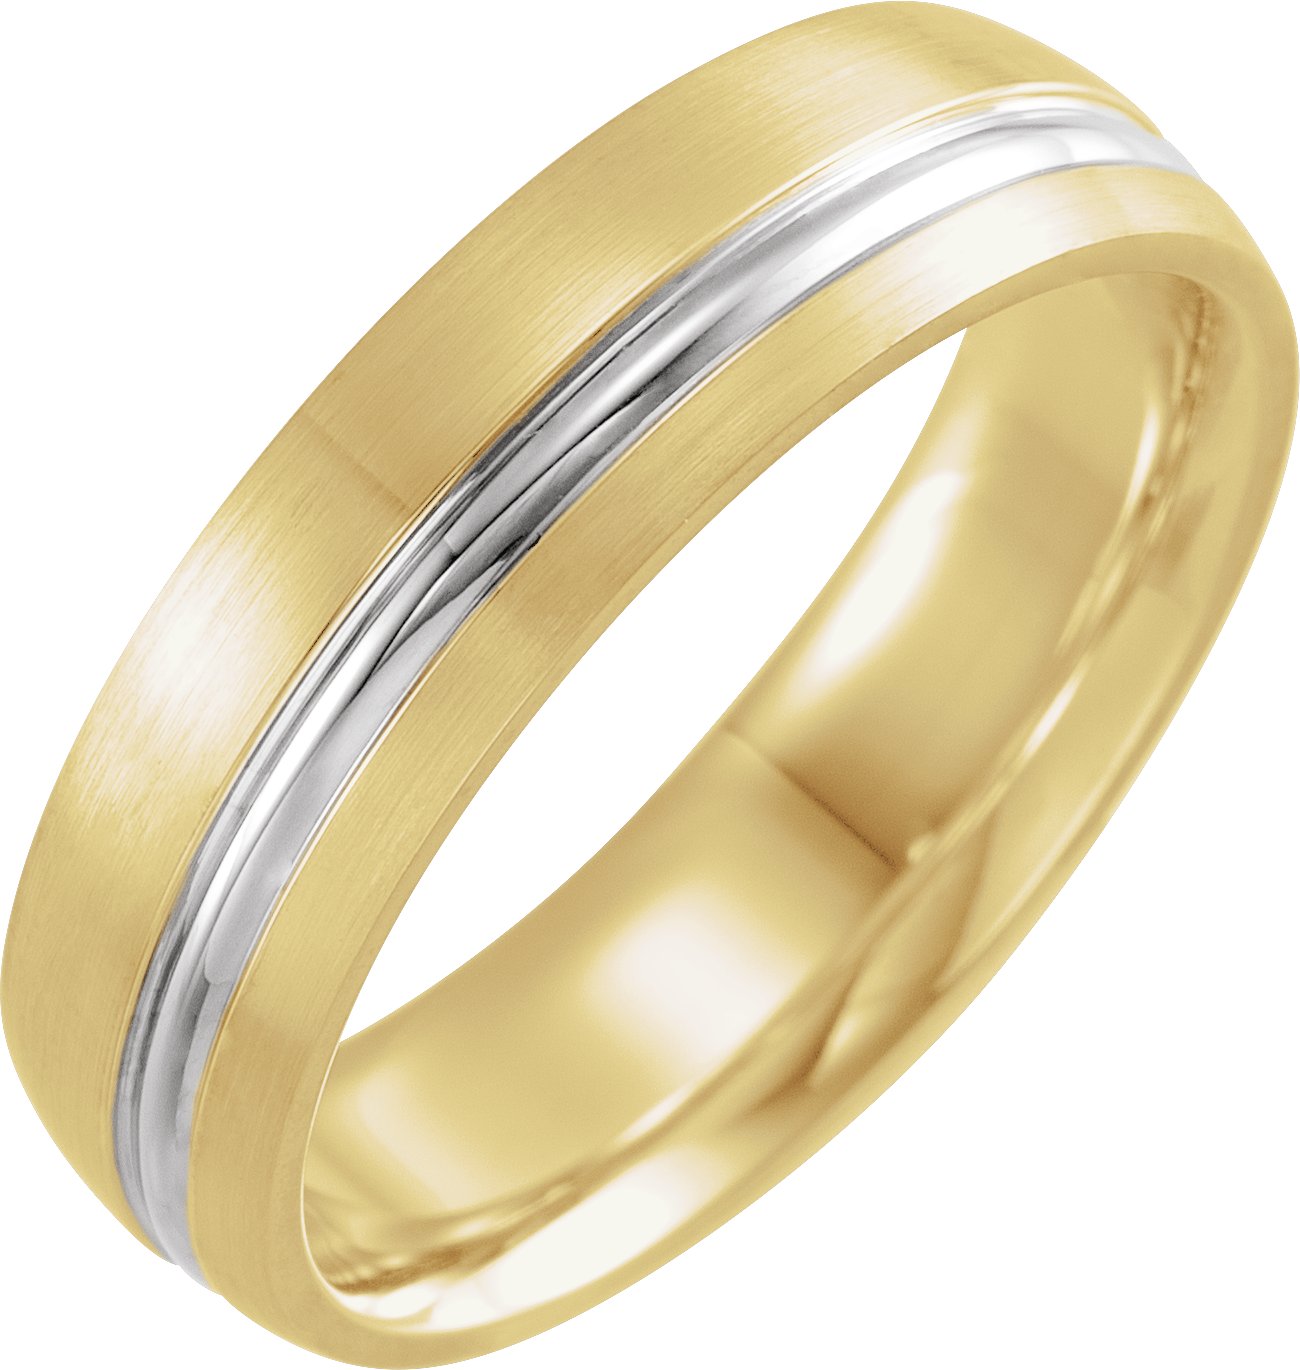 14K Yellow & White 6 mm Grooved Band with Brush Finish Size 10